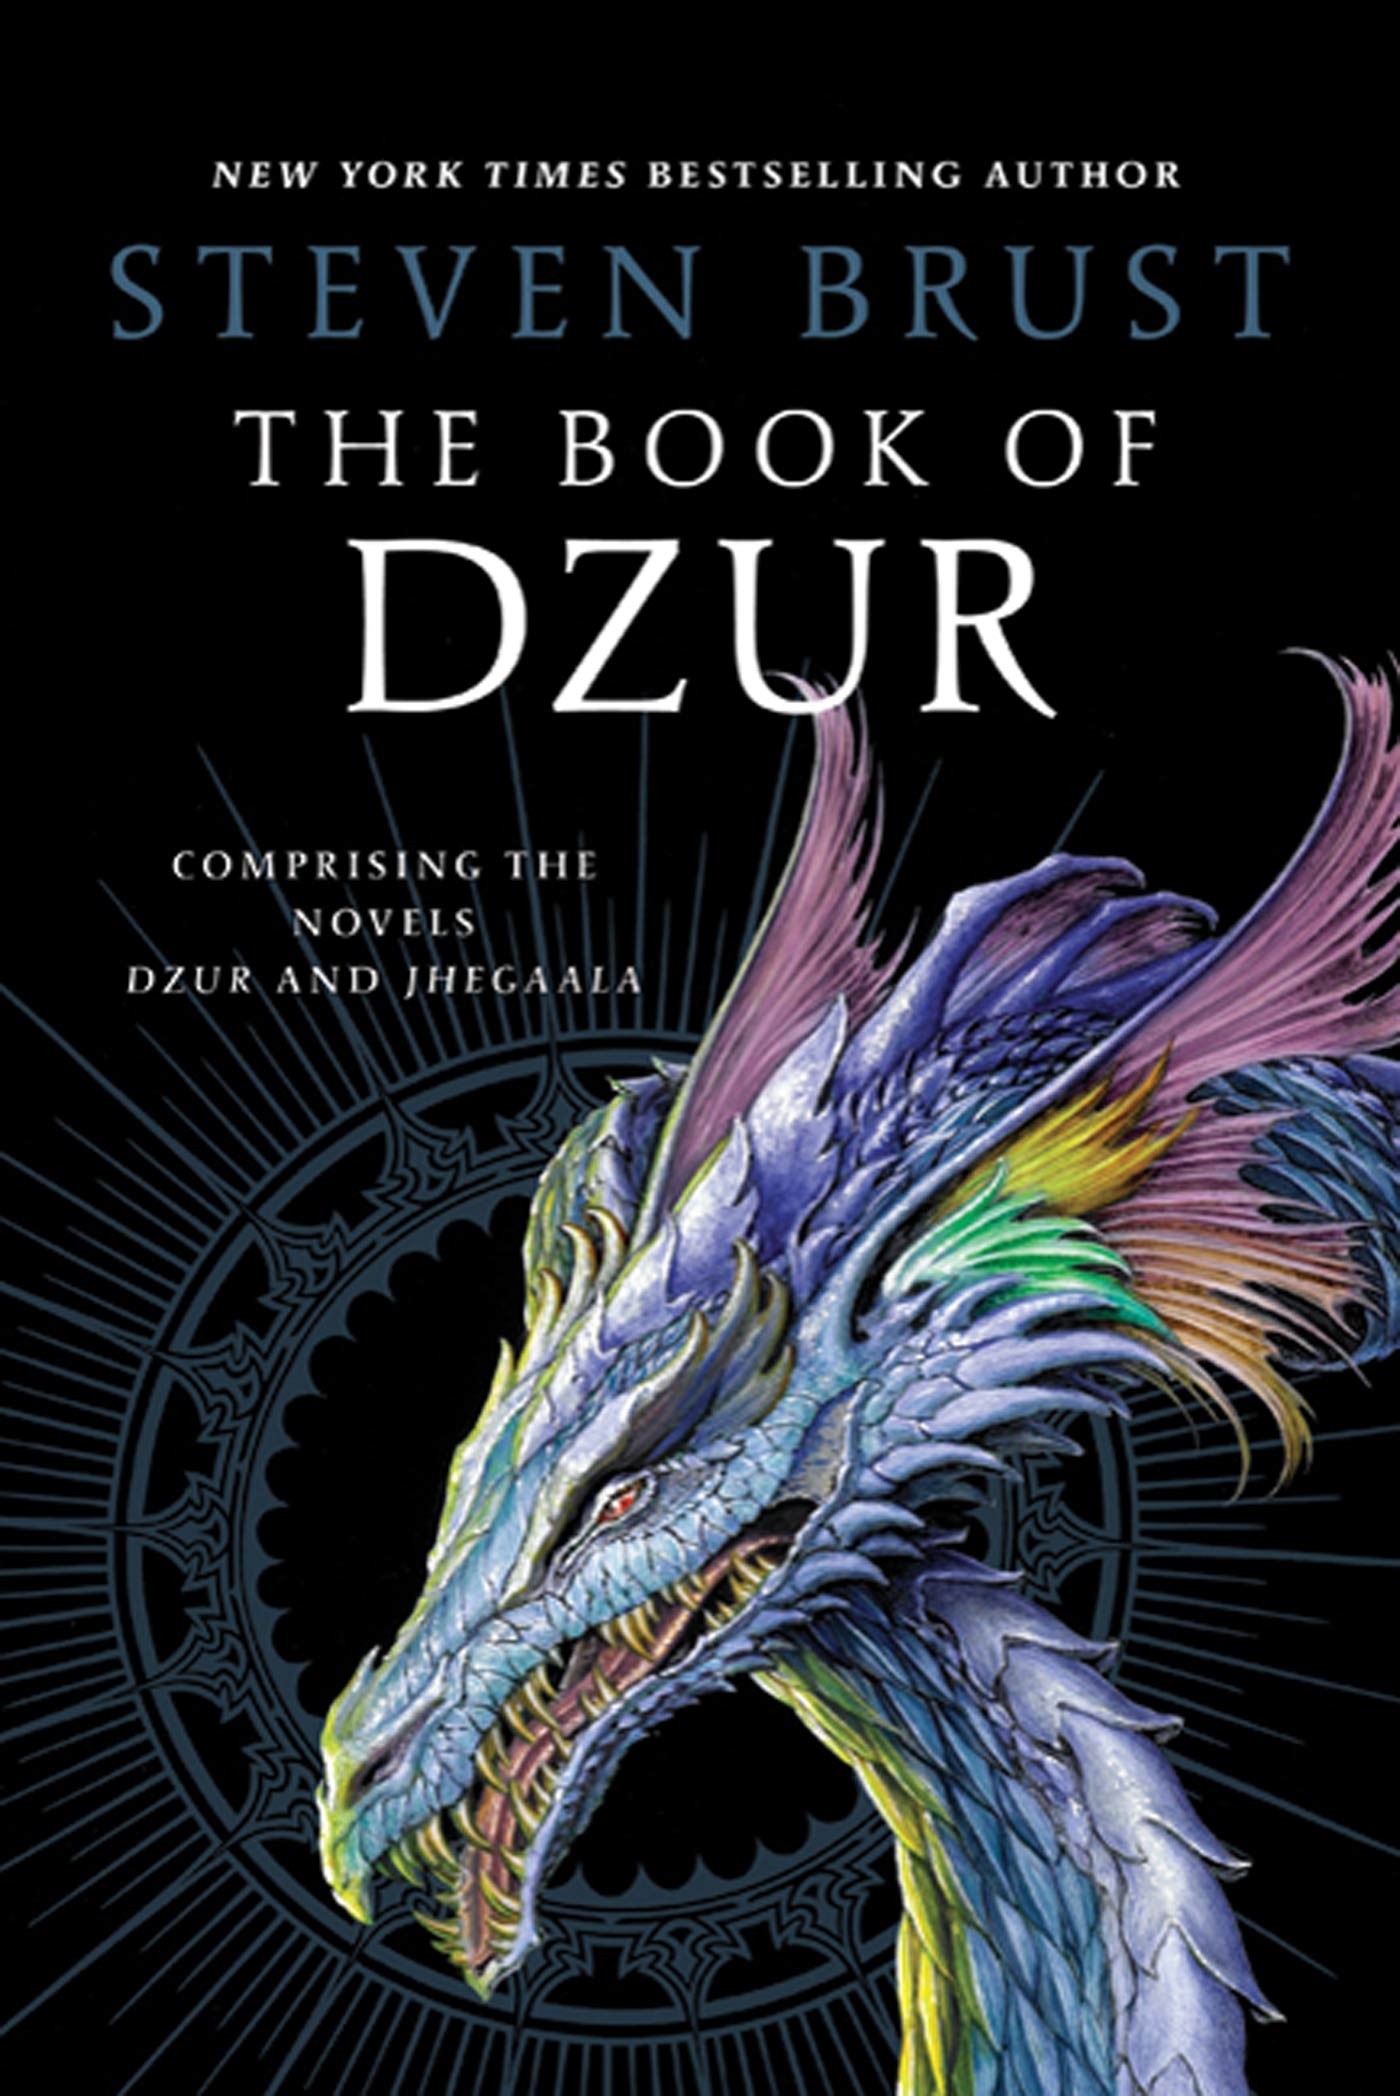 The Book of Dzur : Comprising the Novels Dzur and Jhegaala by Steven Brust